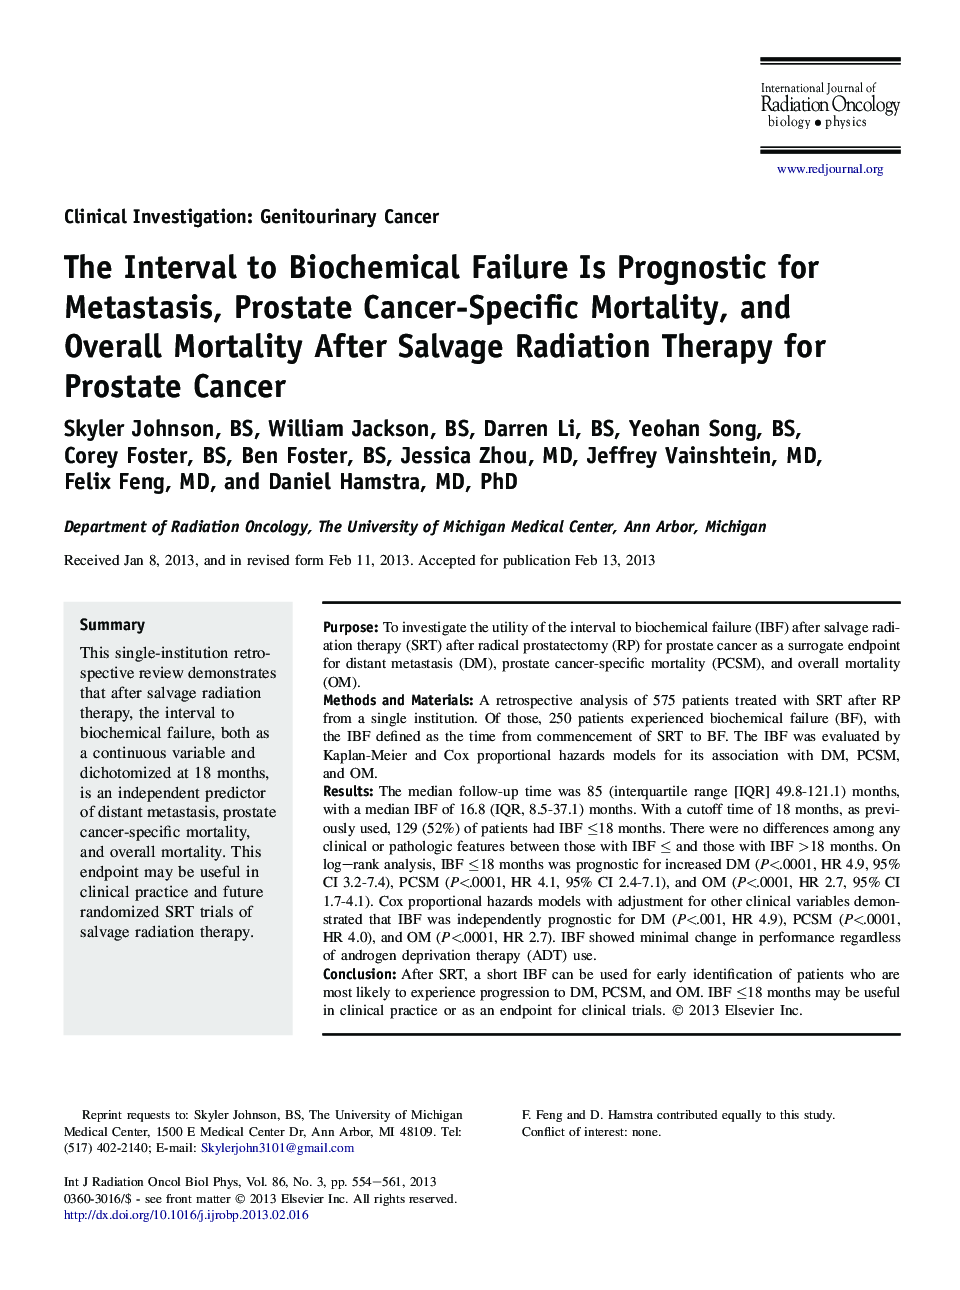 The Interval to Biochemical Failure Is Prognostic for Metastasis, Prostate Cancer-Specific Mortality, and Overall Mortality After Salvage Radiation Therapy for Prostate Cancer